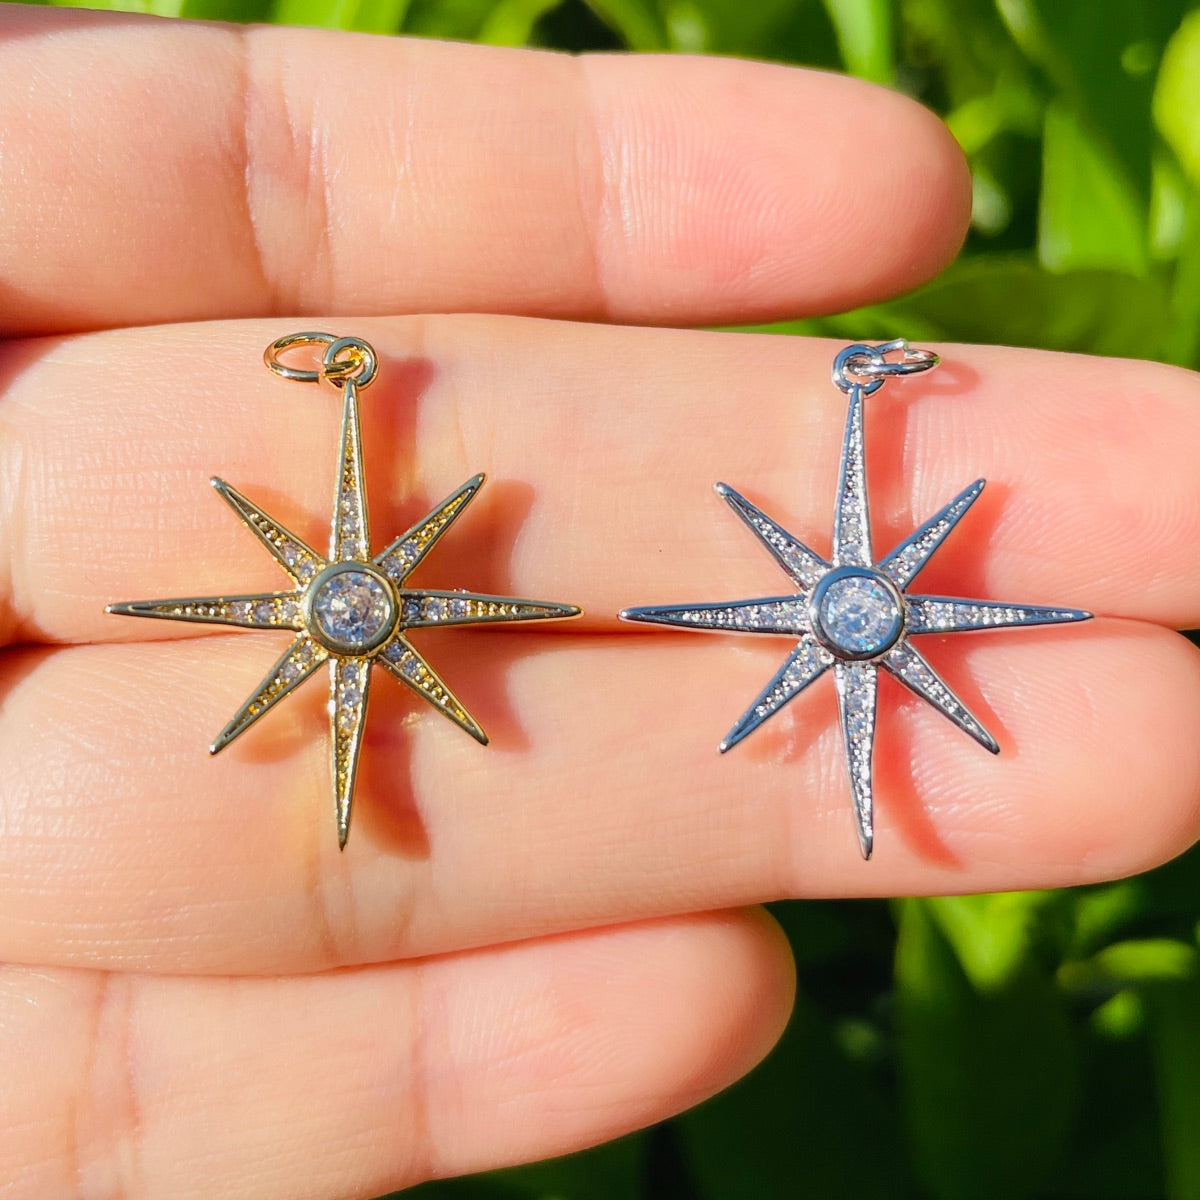 10pcs/lot Gold Silver CZ Paved Star Charms Mix Colors CZ Paved Charms New Charms Arrivals Sun Moon Stars Charms Beads Beyond